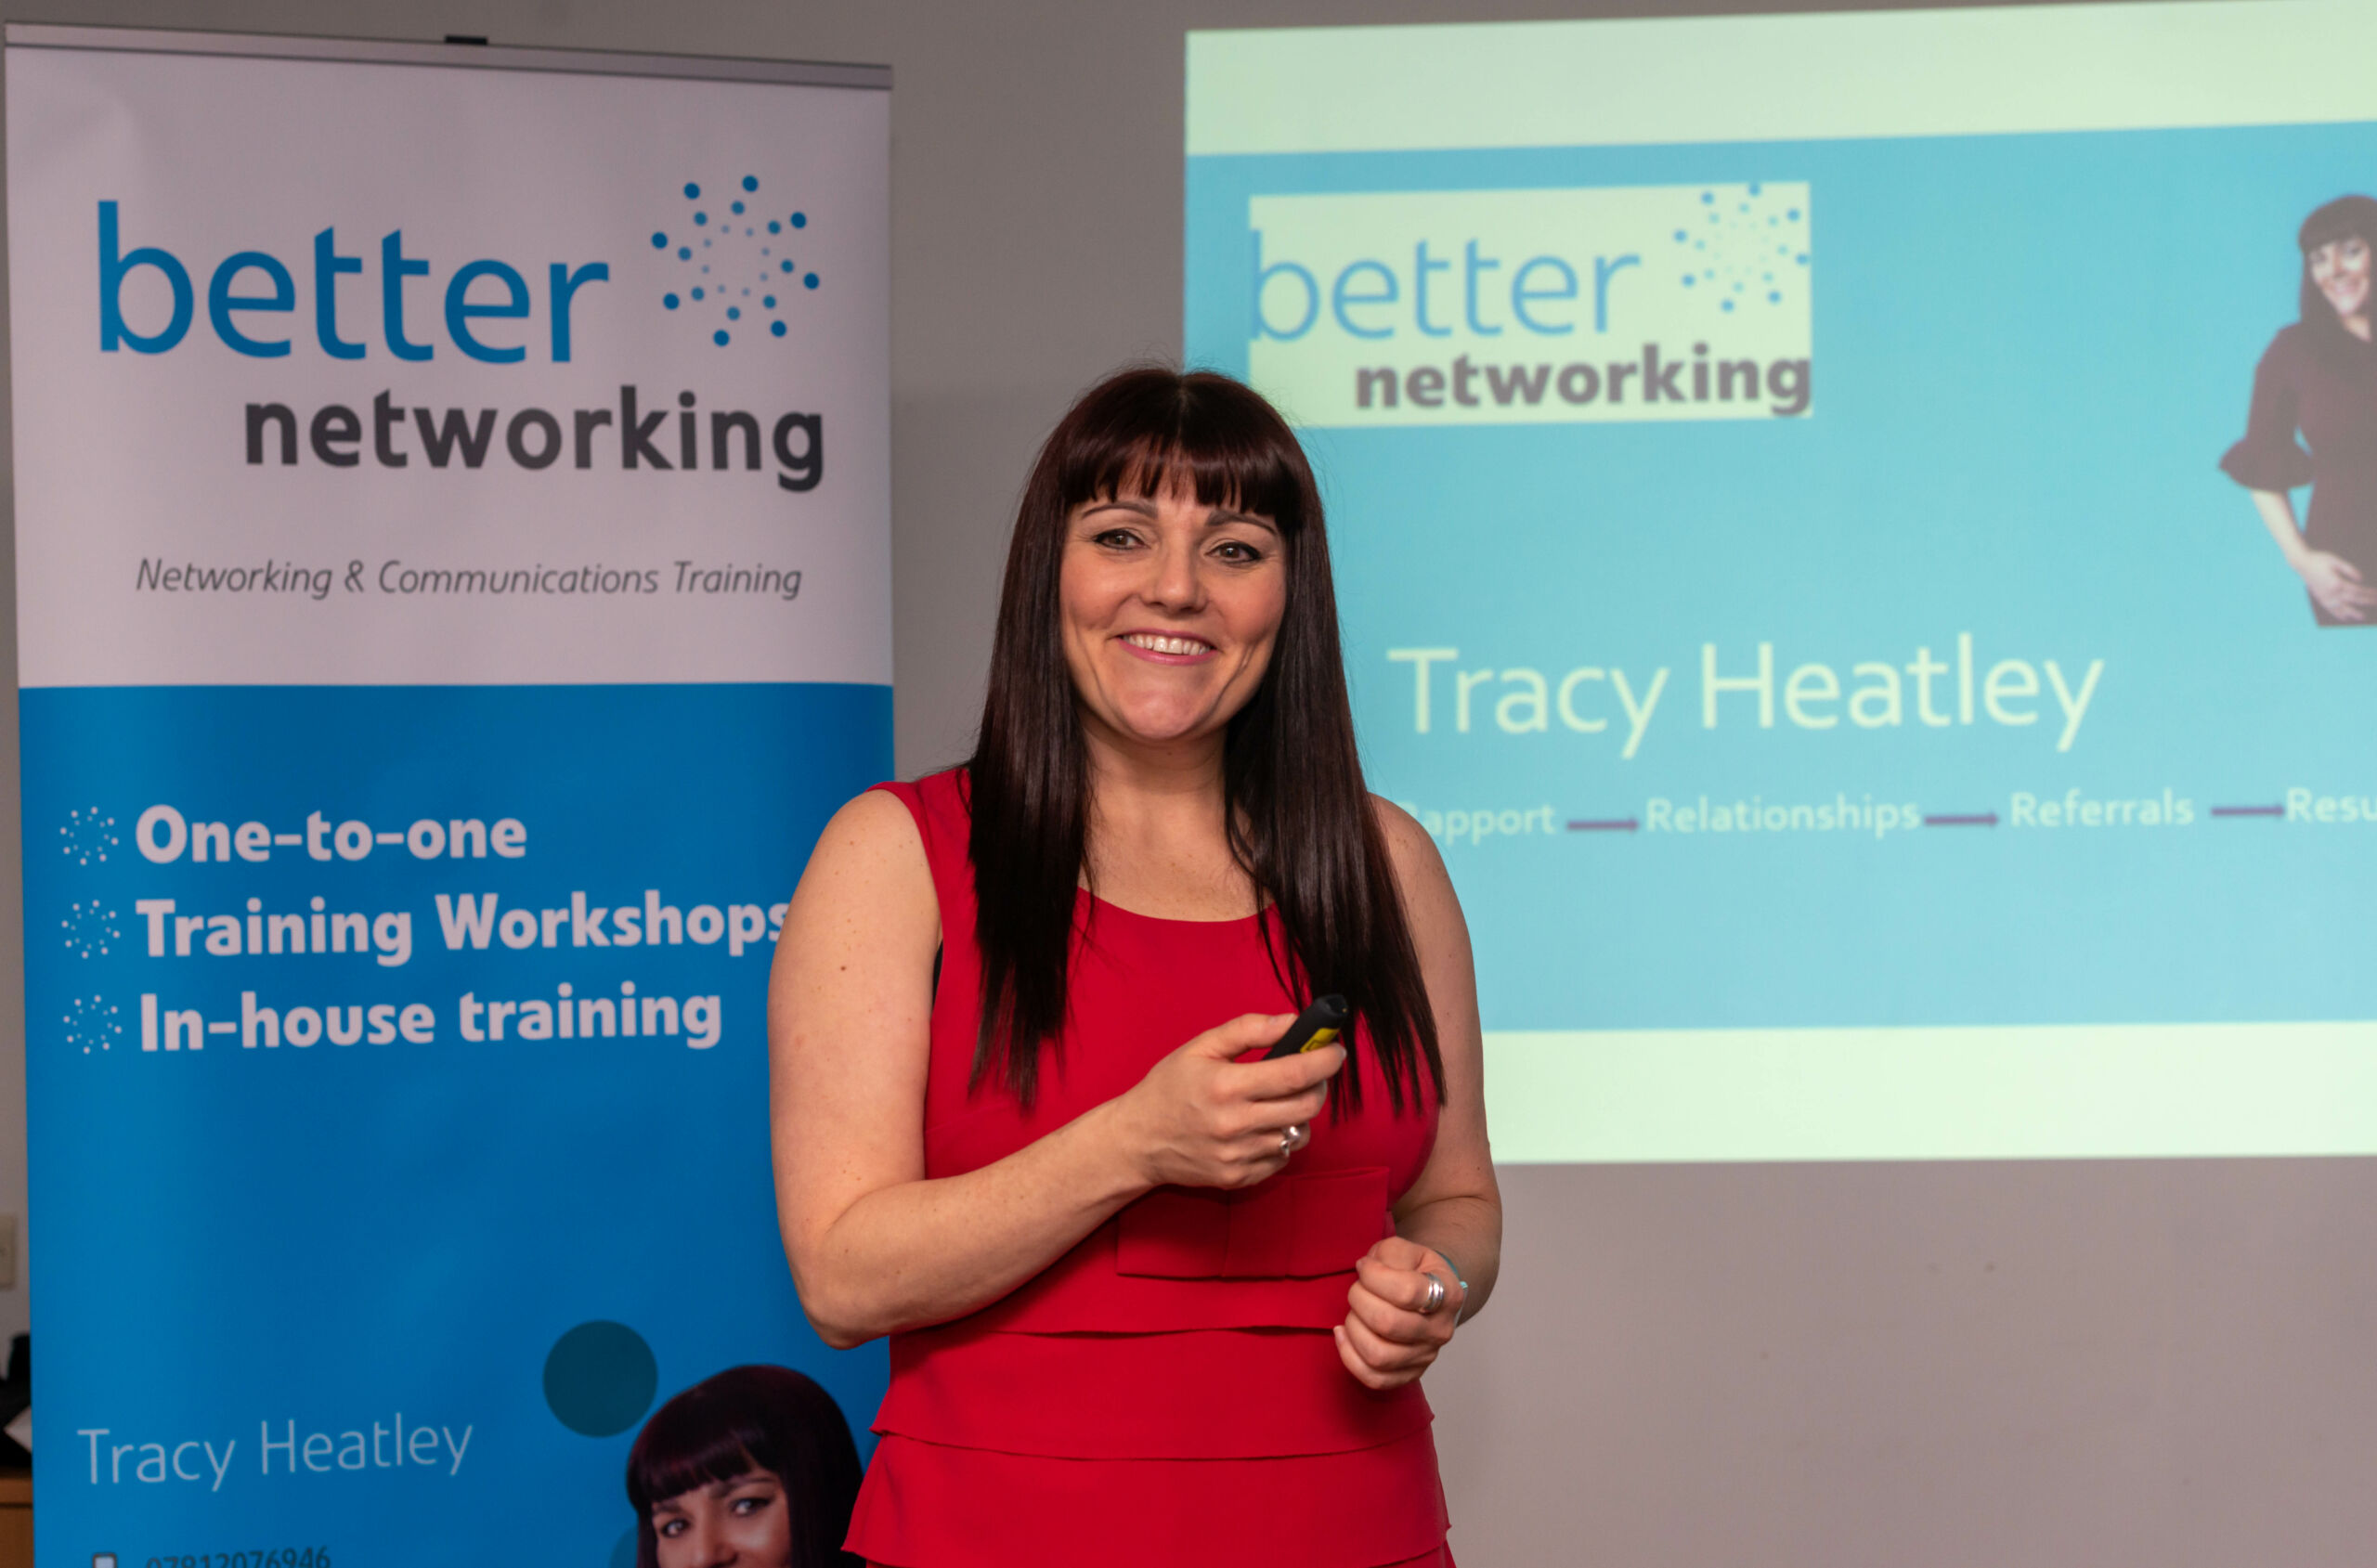 Guest Speaker Tracy Heatley In Action At A Business Event